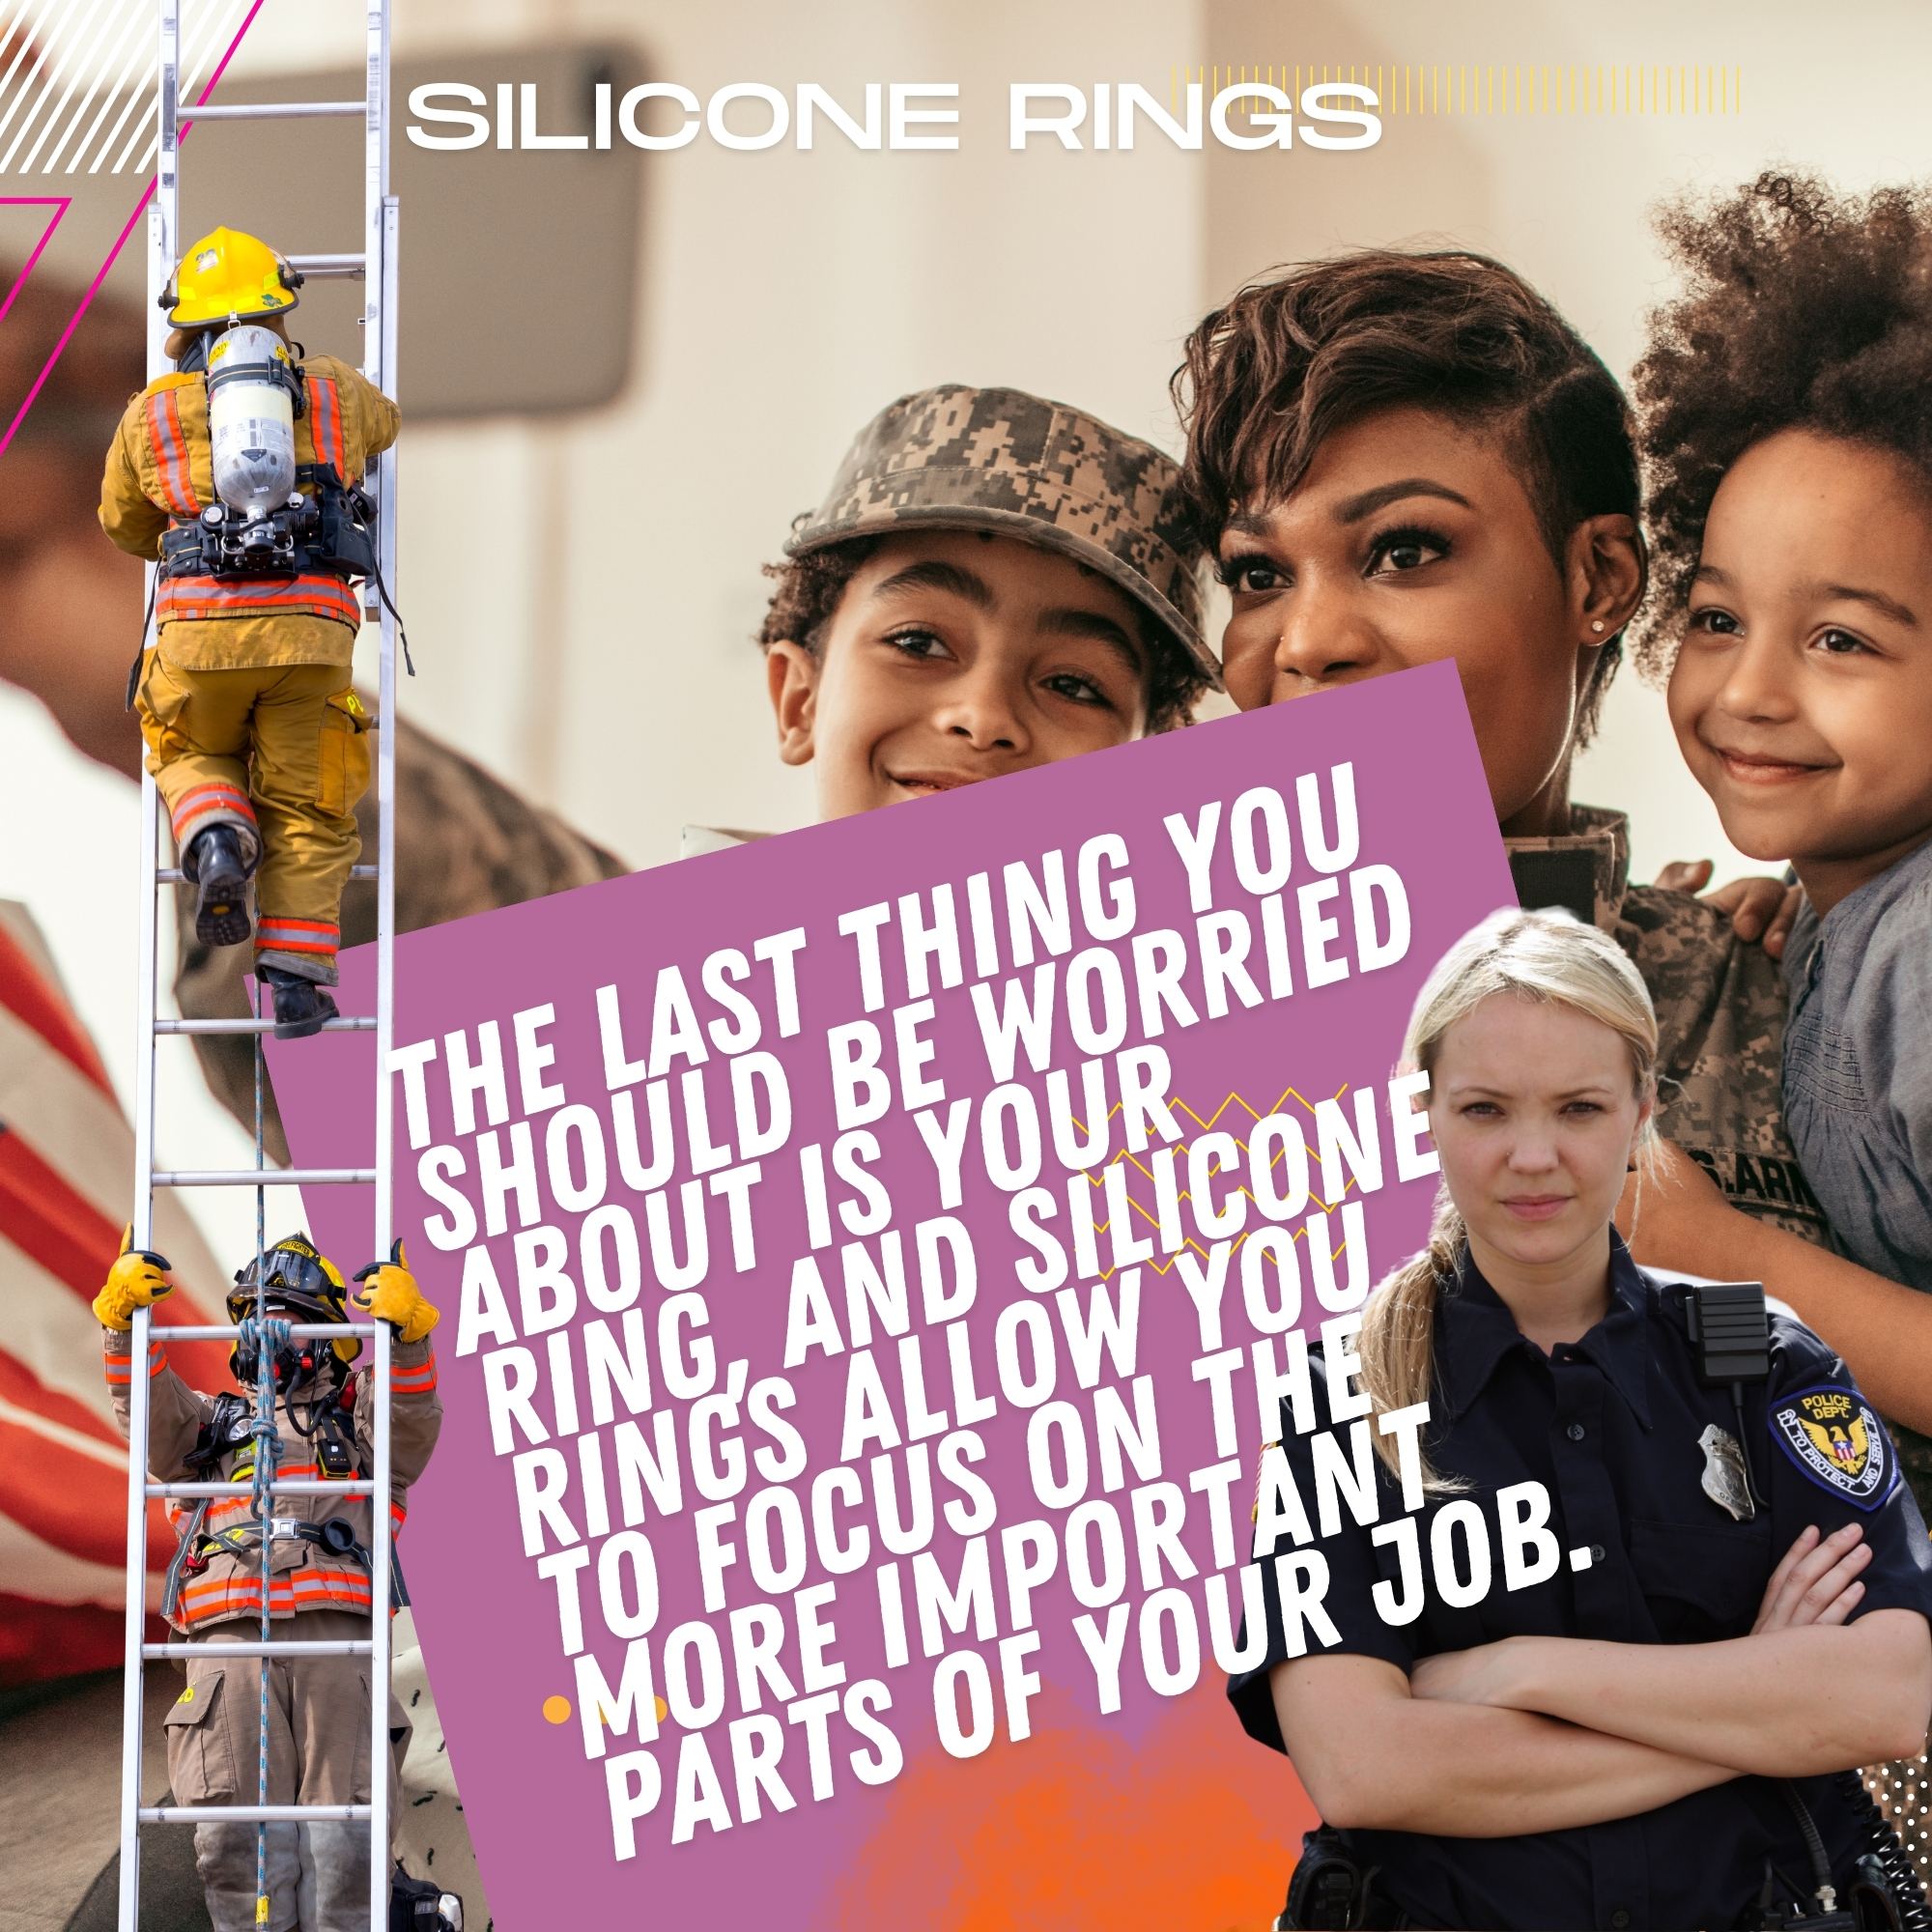 amazing silicone wedding rings for firemen policemen military smtcoffee